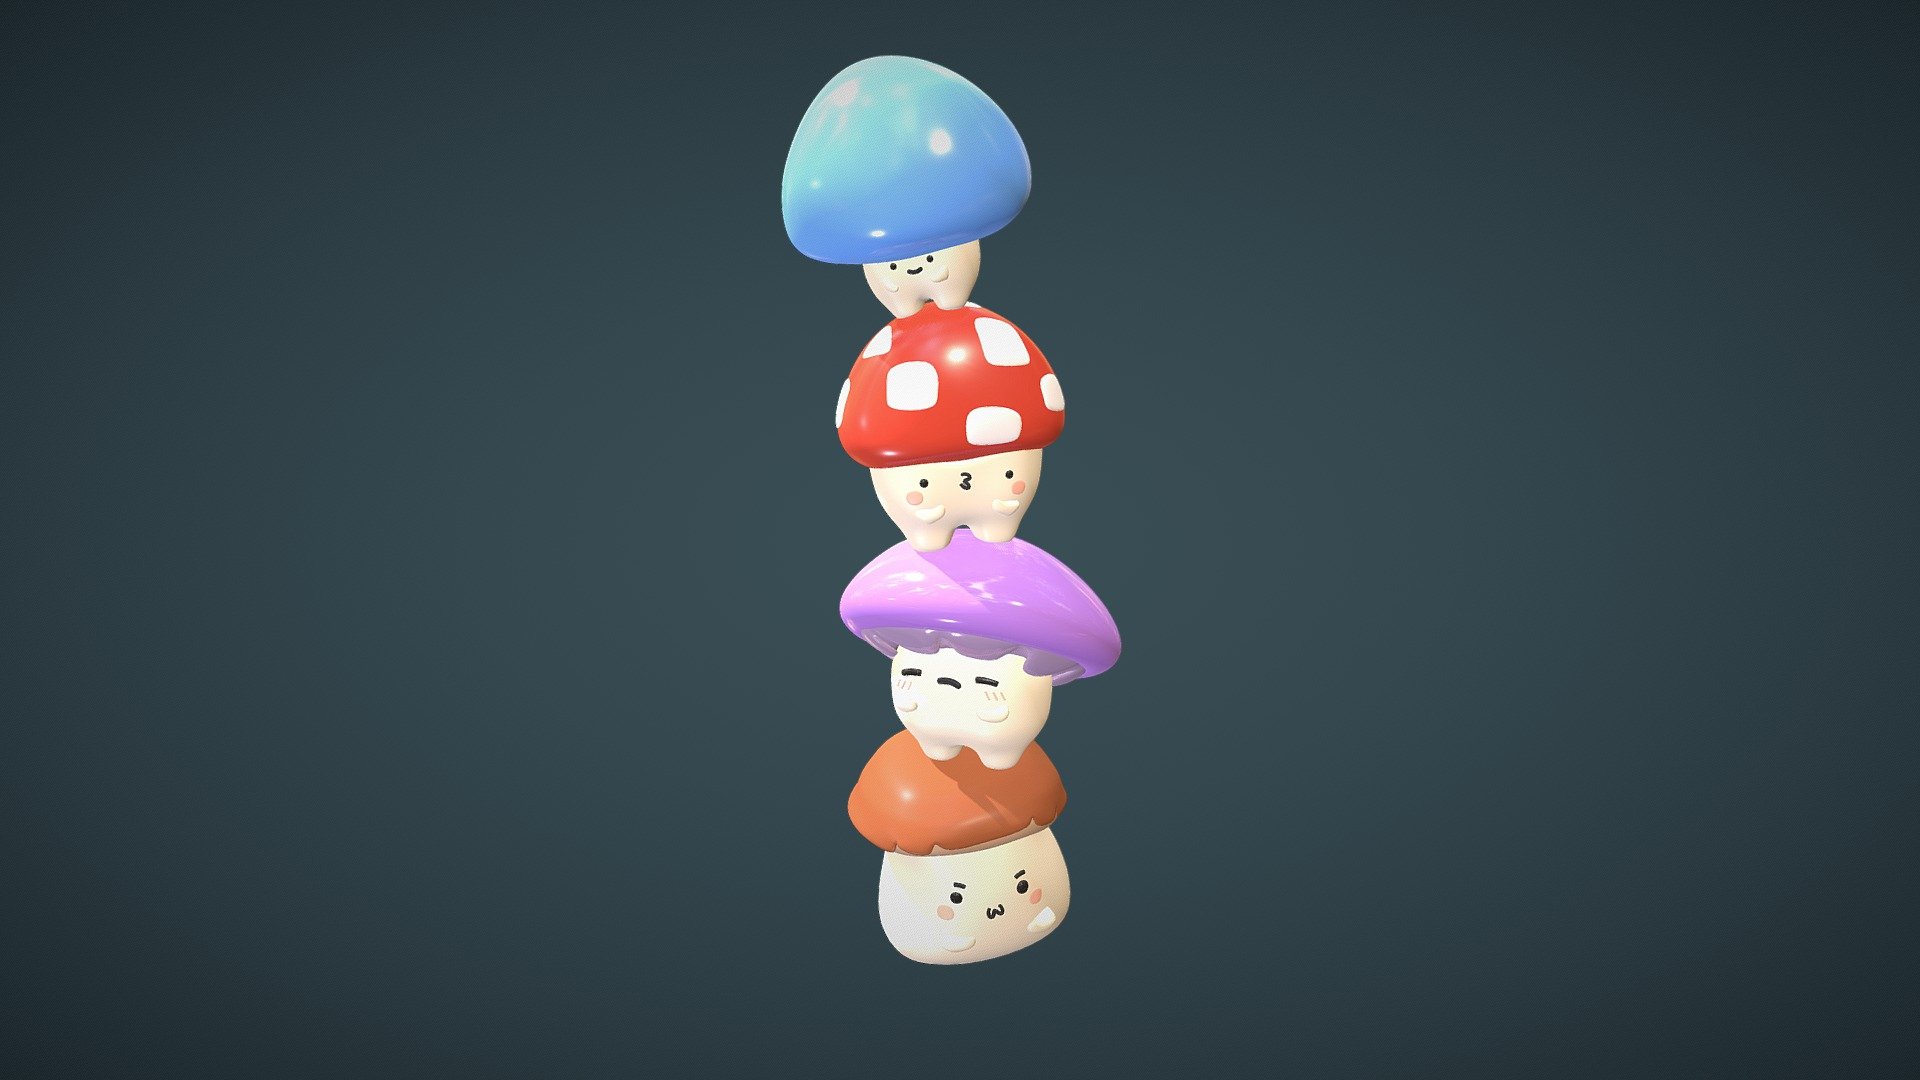 I have created 3d cute mushrooms in blender. You can watch youtube tutorial to learn more.

https://www.youtube.com/watch?v=AaRguwtAIVQ&amp;t=18s - Cute Mushrooms Character - Download Free 3D model by Mery (@mery3d) 3d model